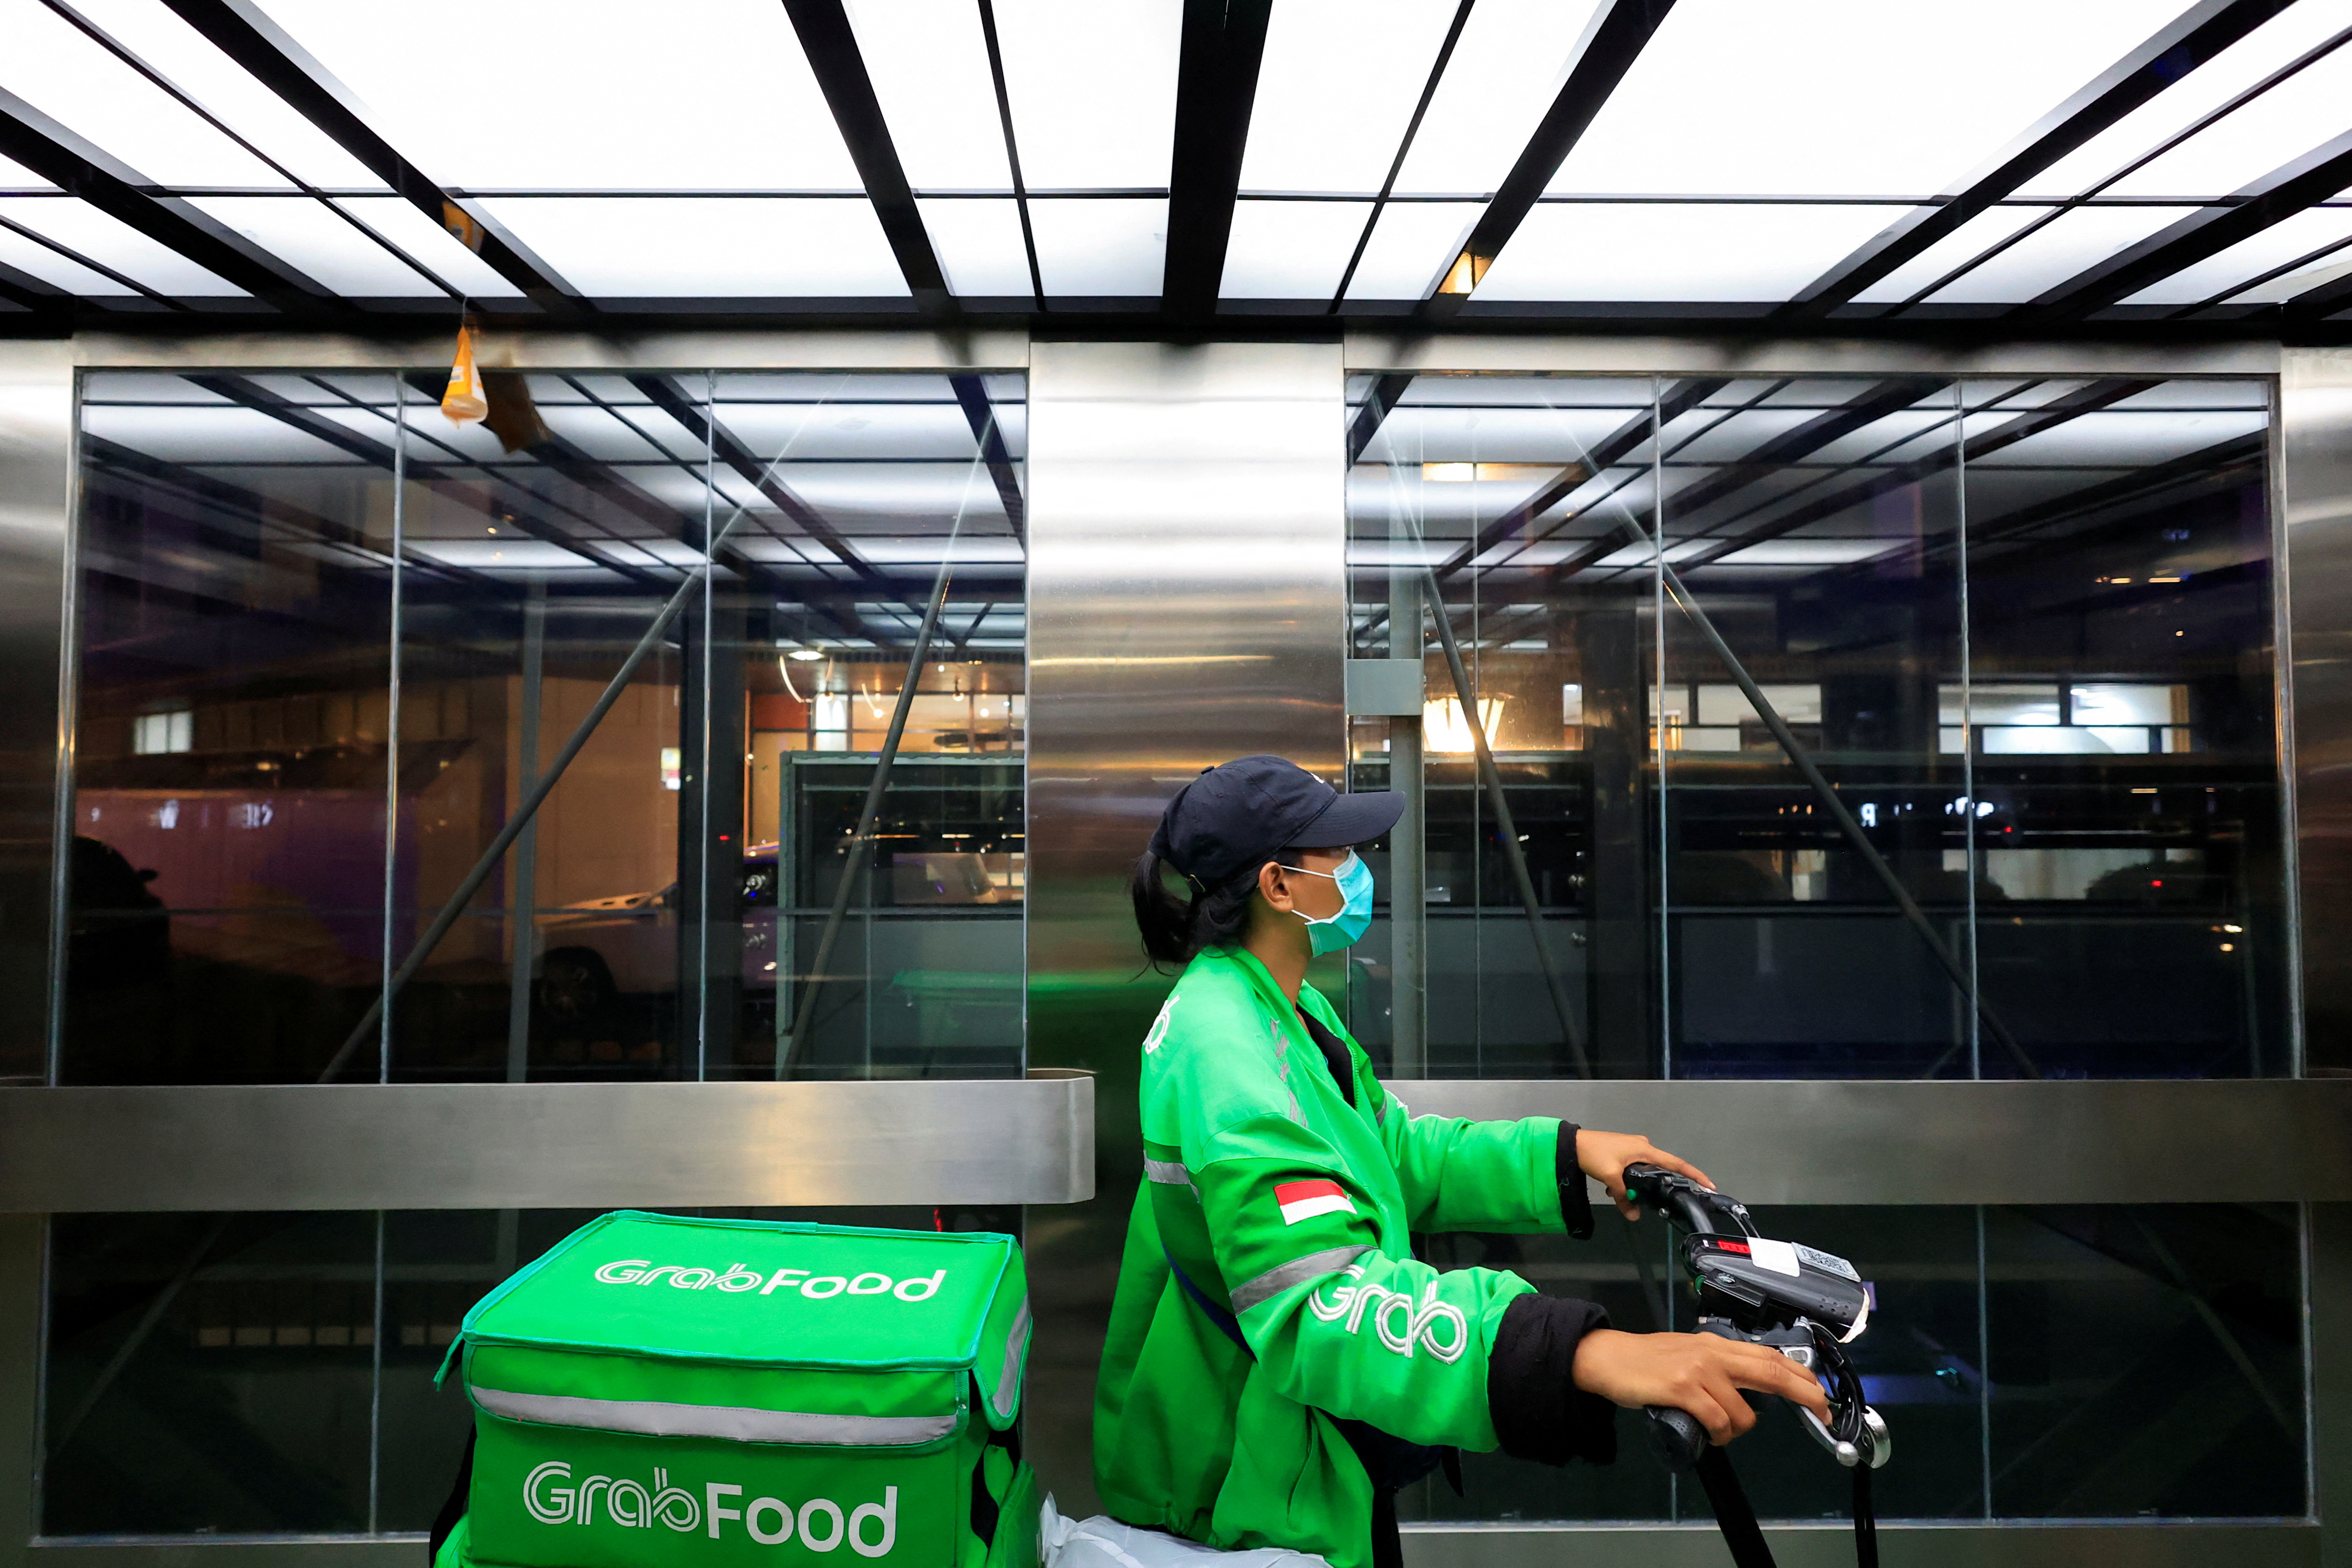 Driver working for the ridesharing company Grab delivers food amid of the COVID-19 pandemic in Jakarta